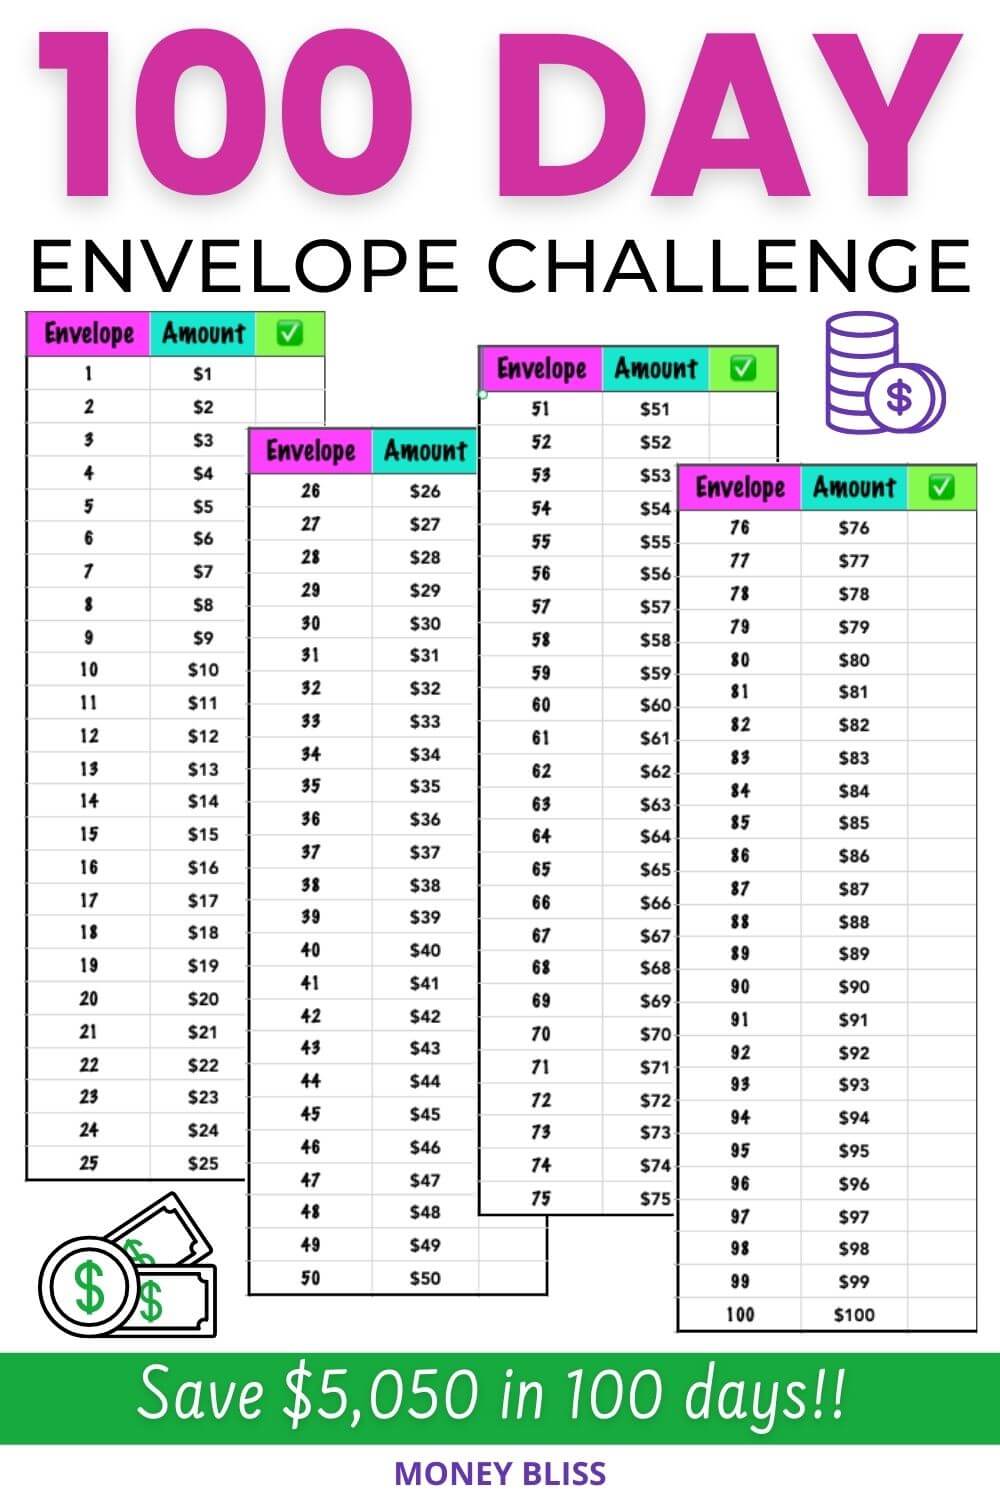 Here is the 100 envelope challenge you have been waiting for! With this aggressive money saving challenge you can save 10000 in 100 days. This saving money hack will break the charts! Learn how to save $10000 in 100 days. This aggressive money saving plan is perfect to reach financial freedom faster. Follow this saving money challenge from Money Bliss!